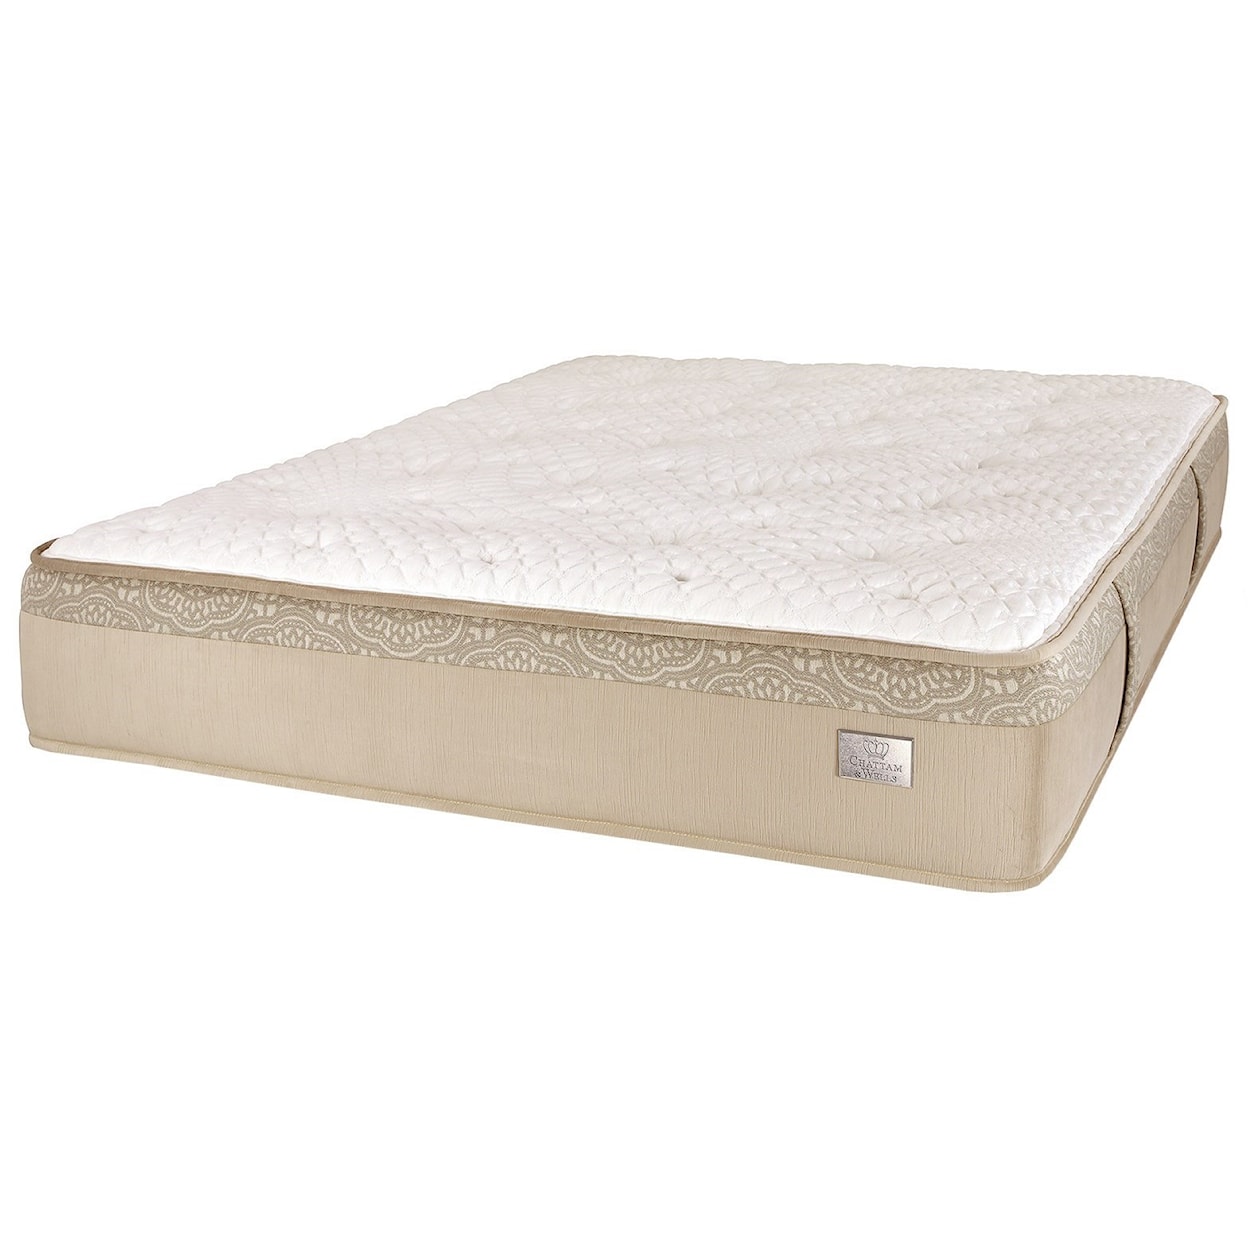 Spring Air Showstopper Firm Full Pocketed Coil Mattress